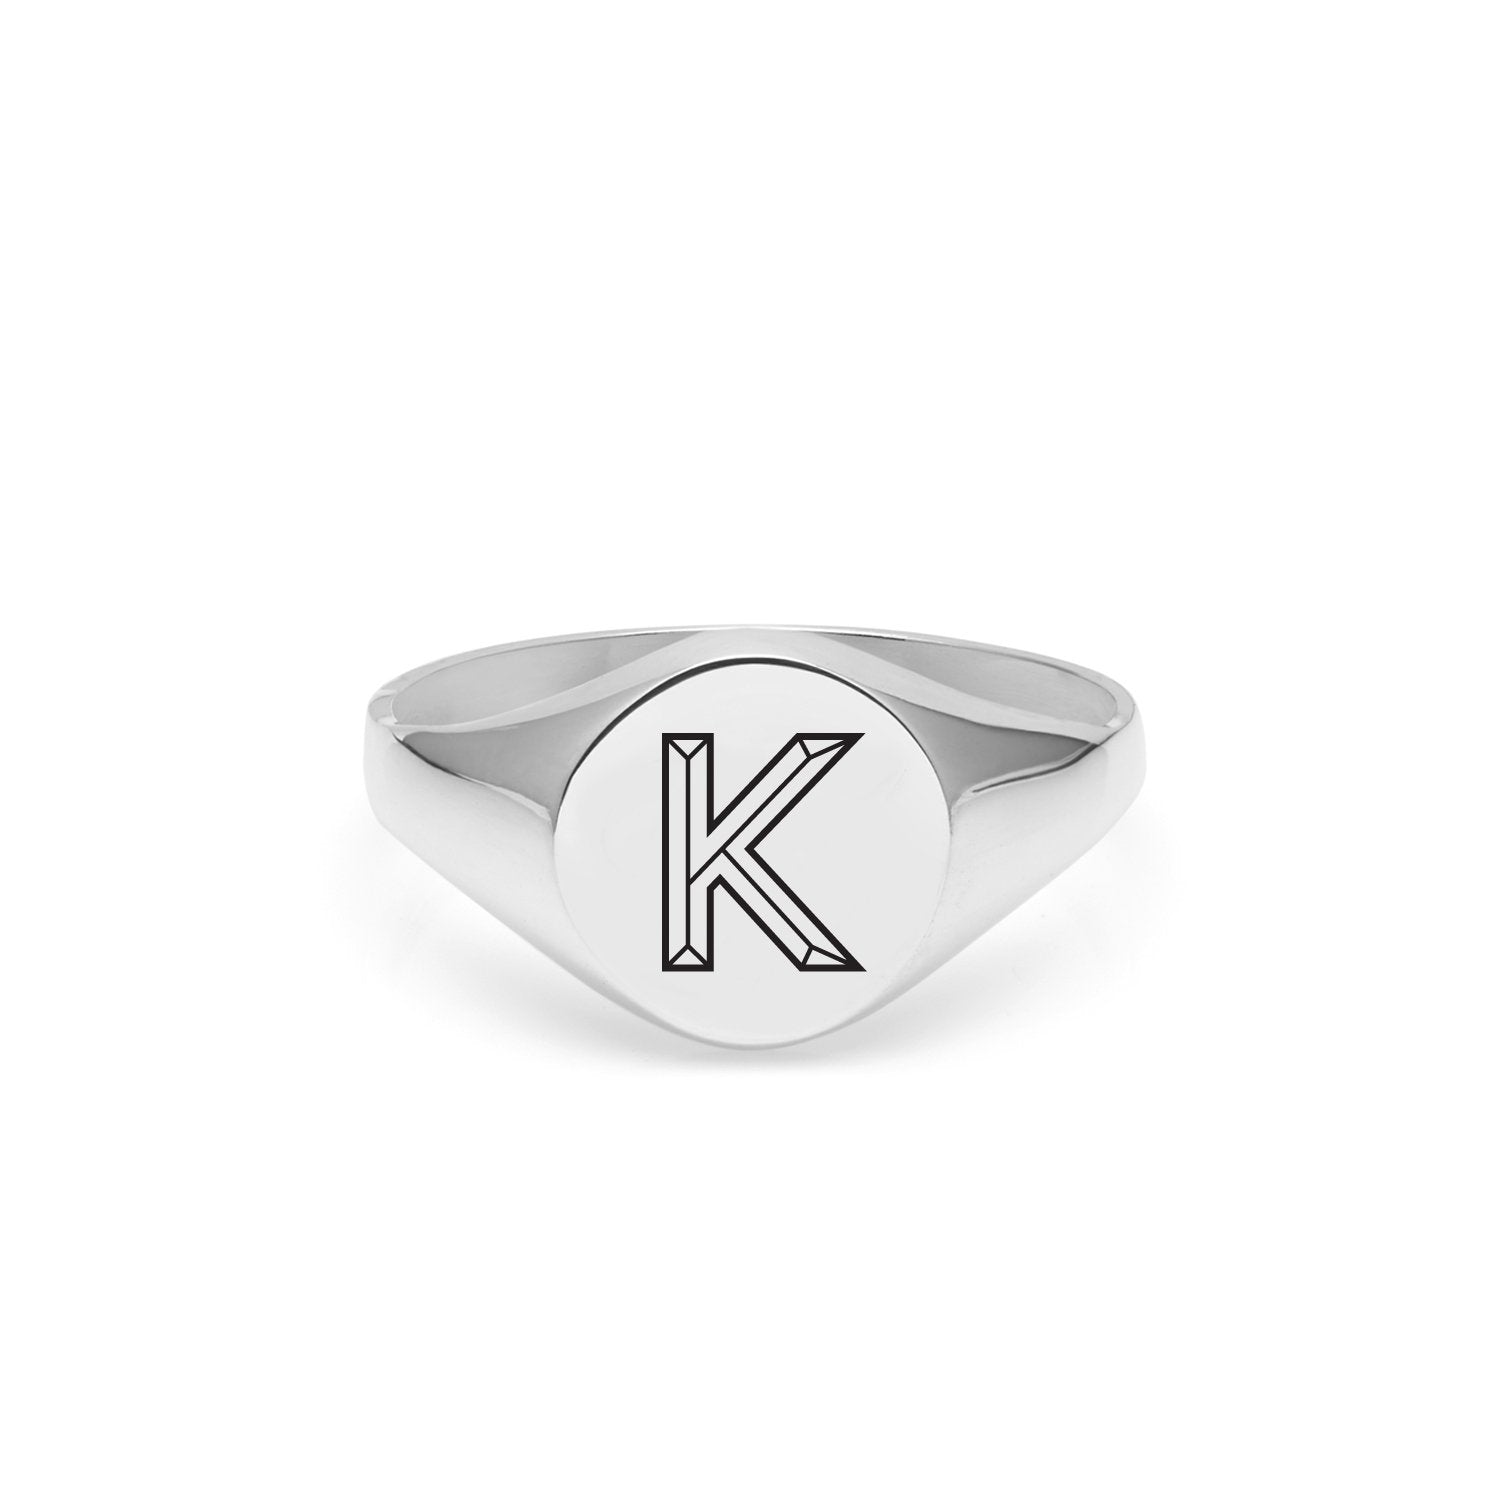 Facett Initial K Round Signet Ring - Silver - Myia Bonner Jewellery